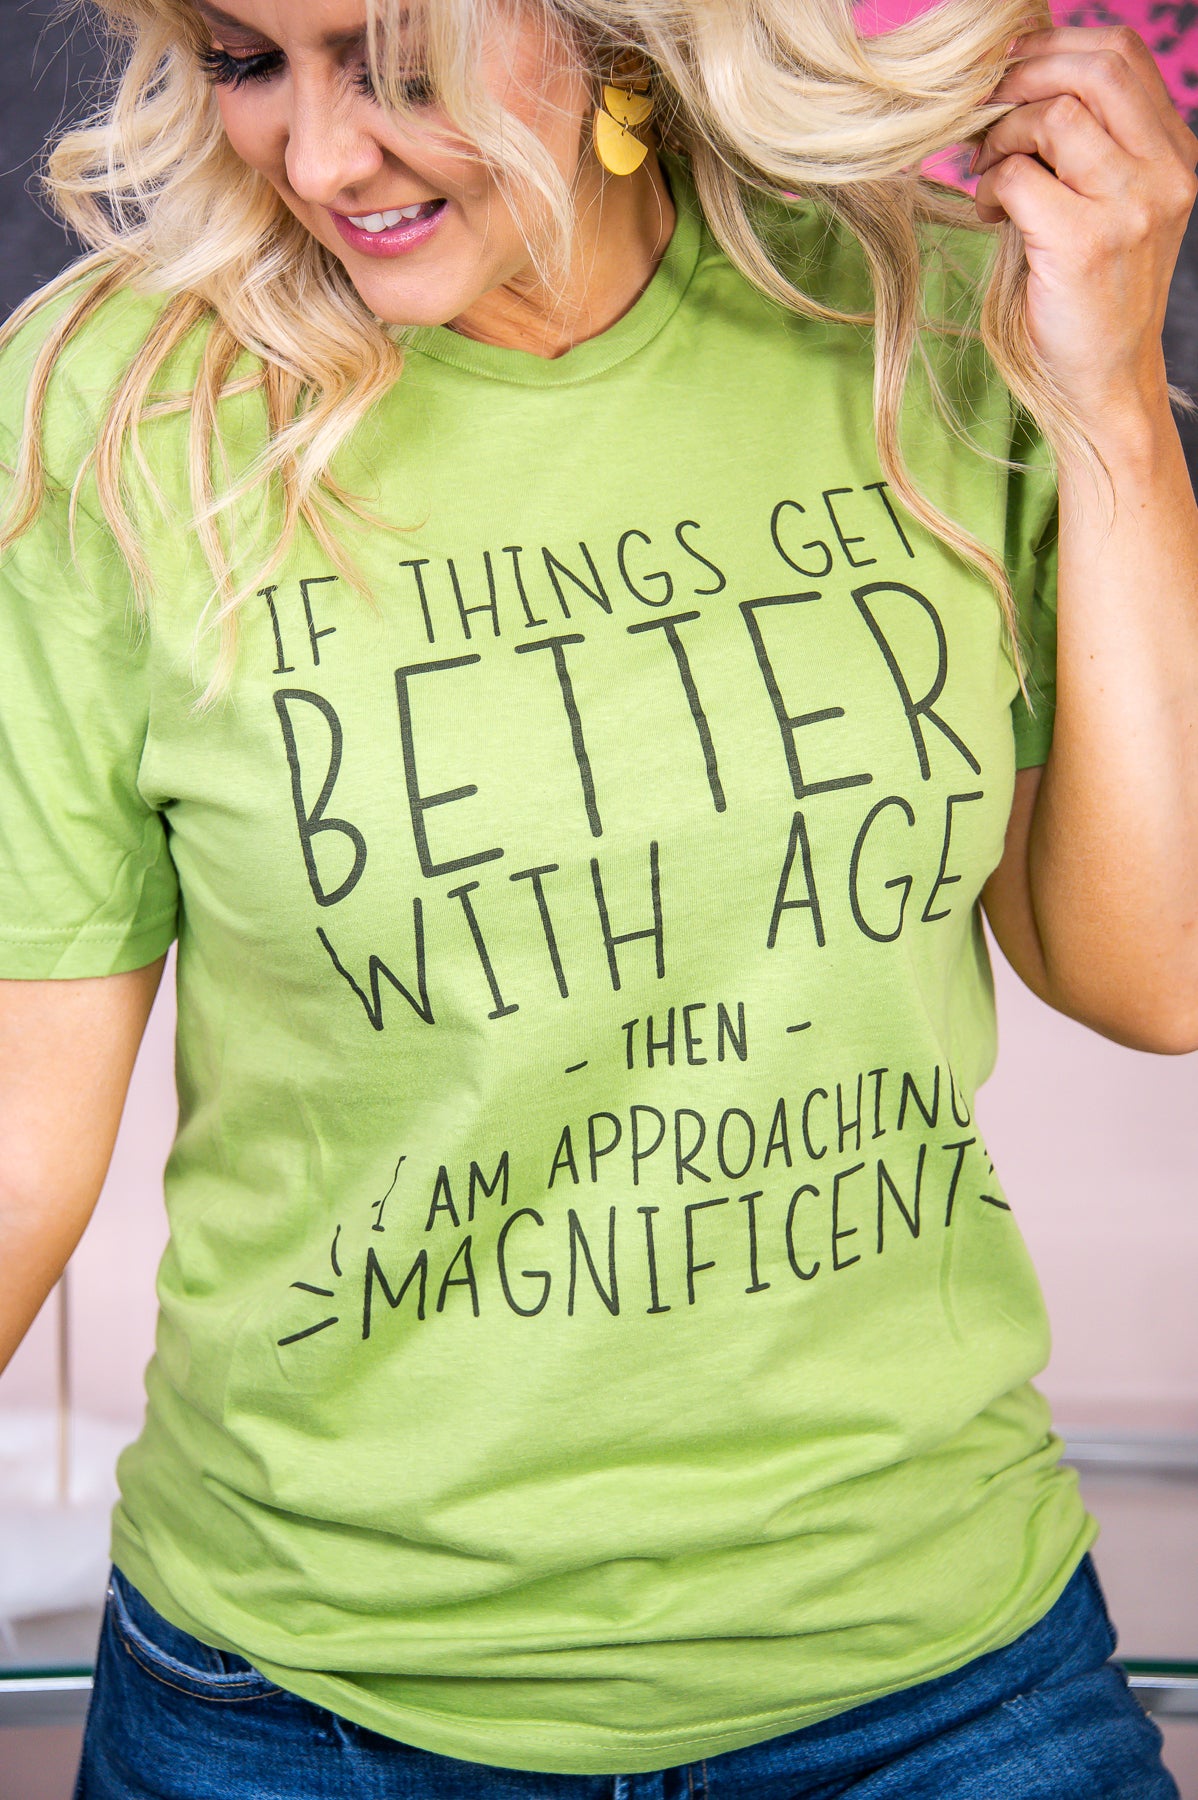 If Things Get Better With Age Kiwi Graphic Tee - A2893KI